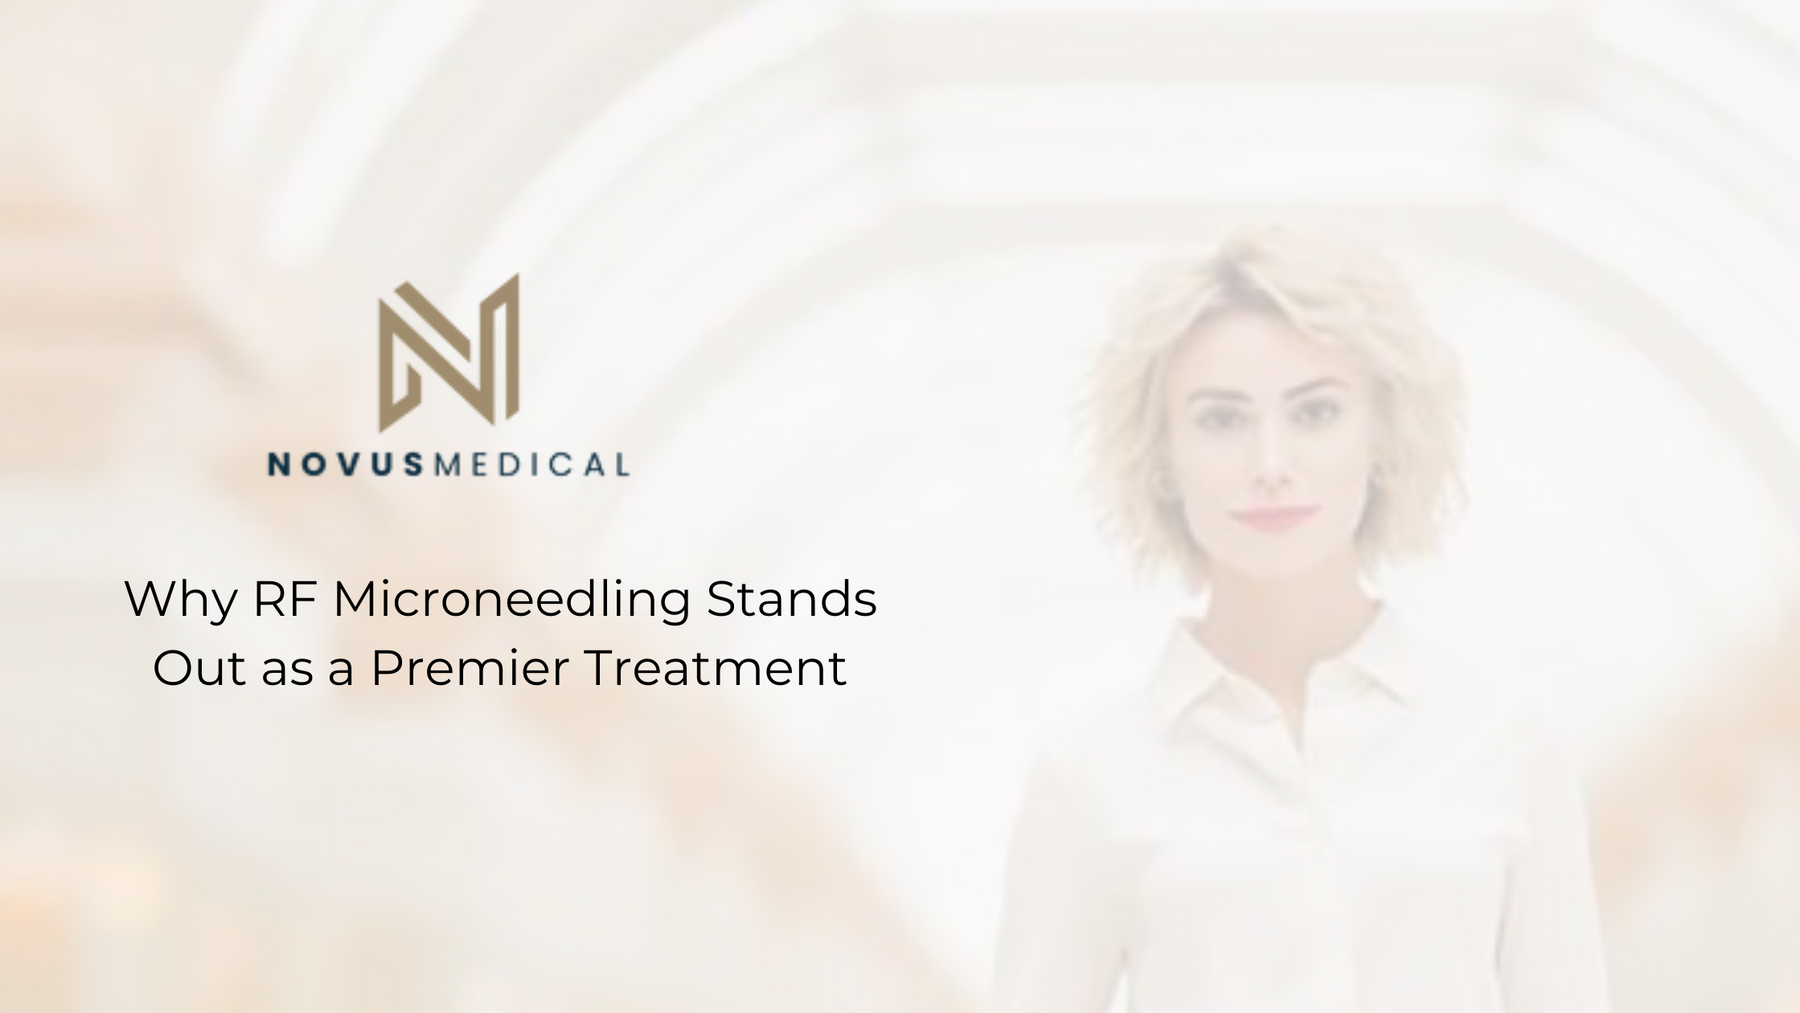 Why RF Microneedling Stands Out as a Premier Treatment